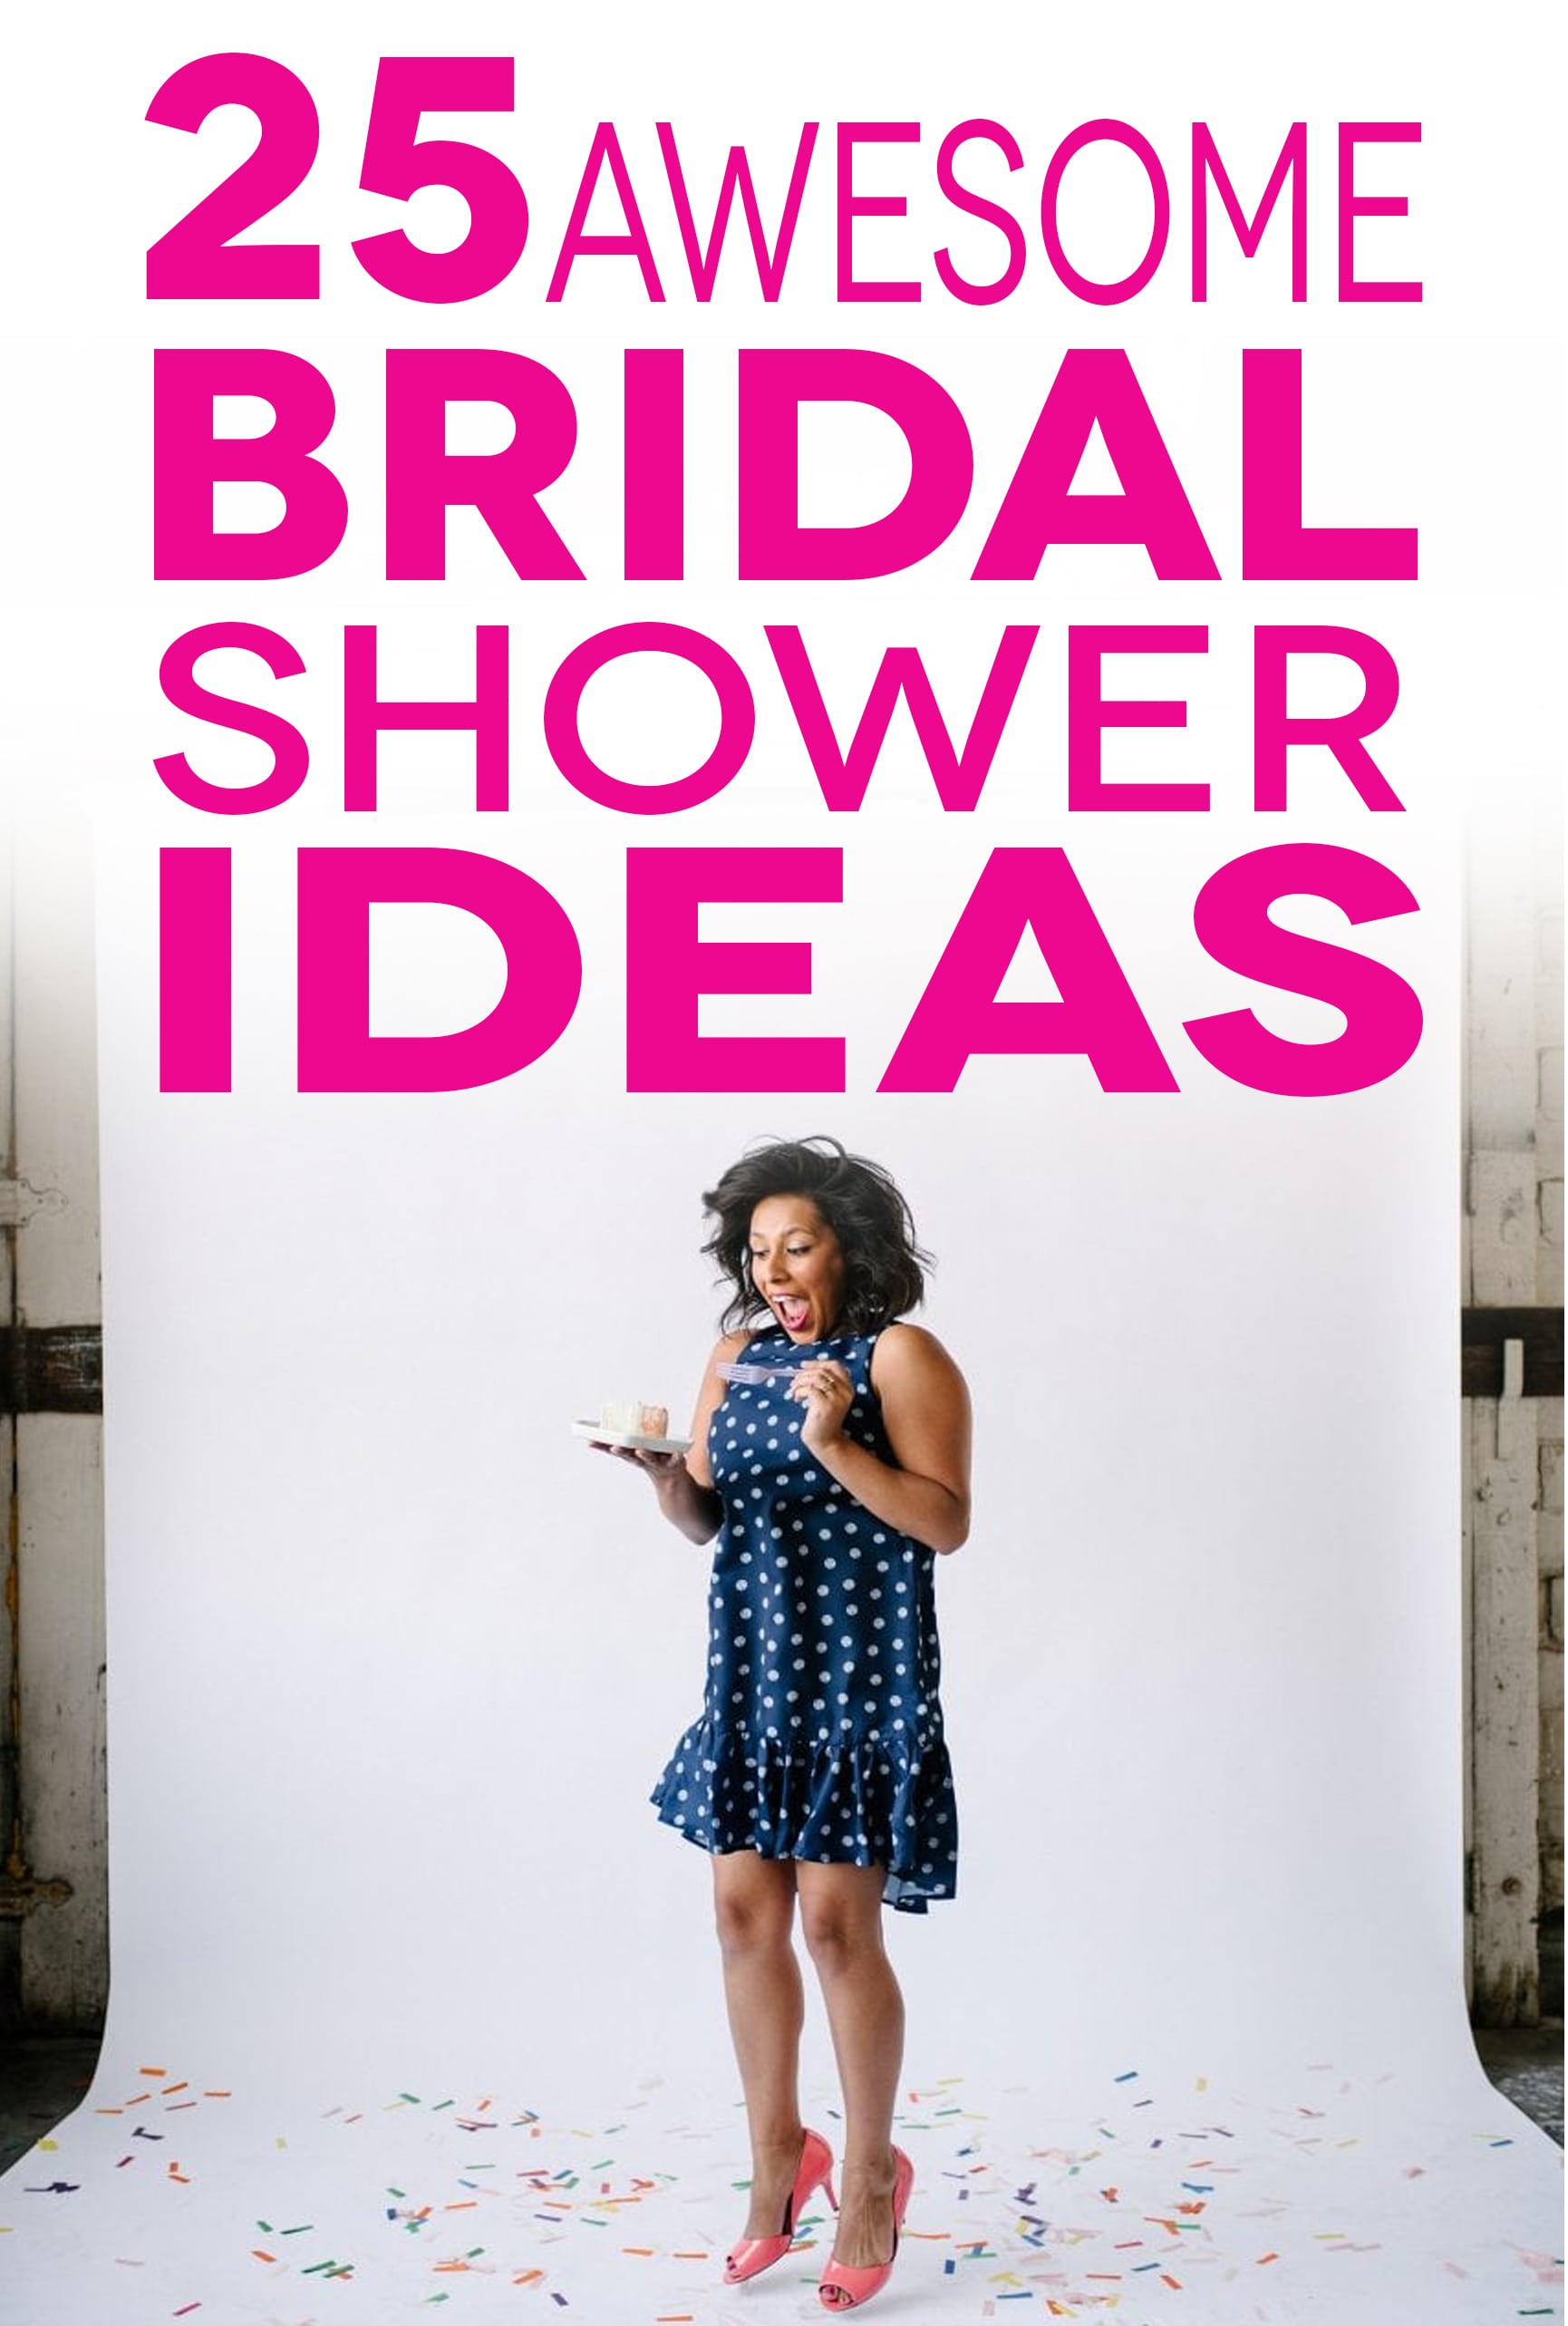 bridal shower ideas & bridal shower themes - A woman wearing a short blue dress and heels, jumps up in the air with the text "25 awesome bridal shower ideas" written in pink above her head